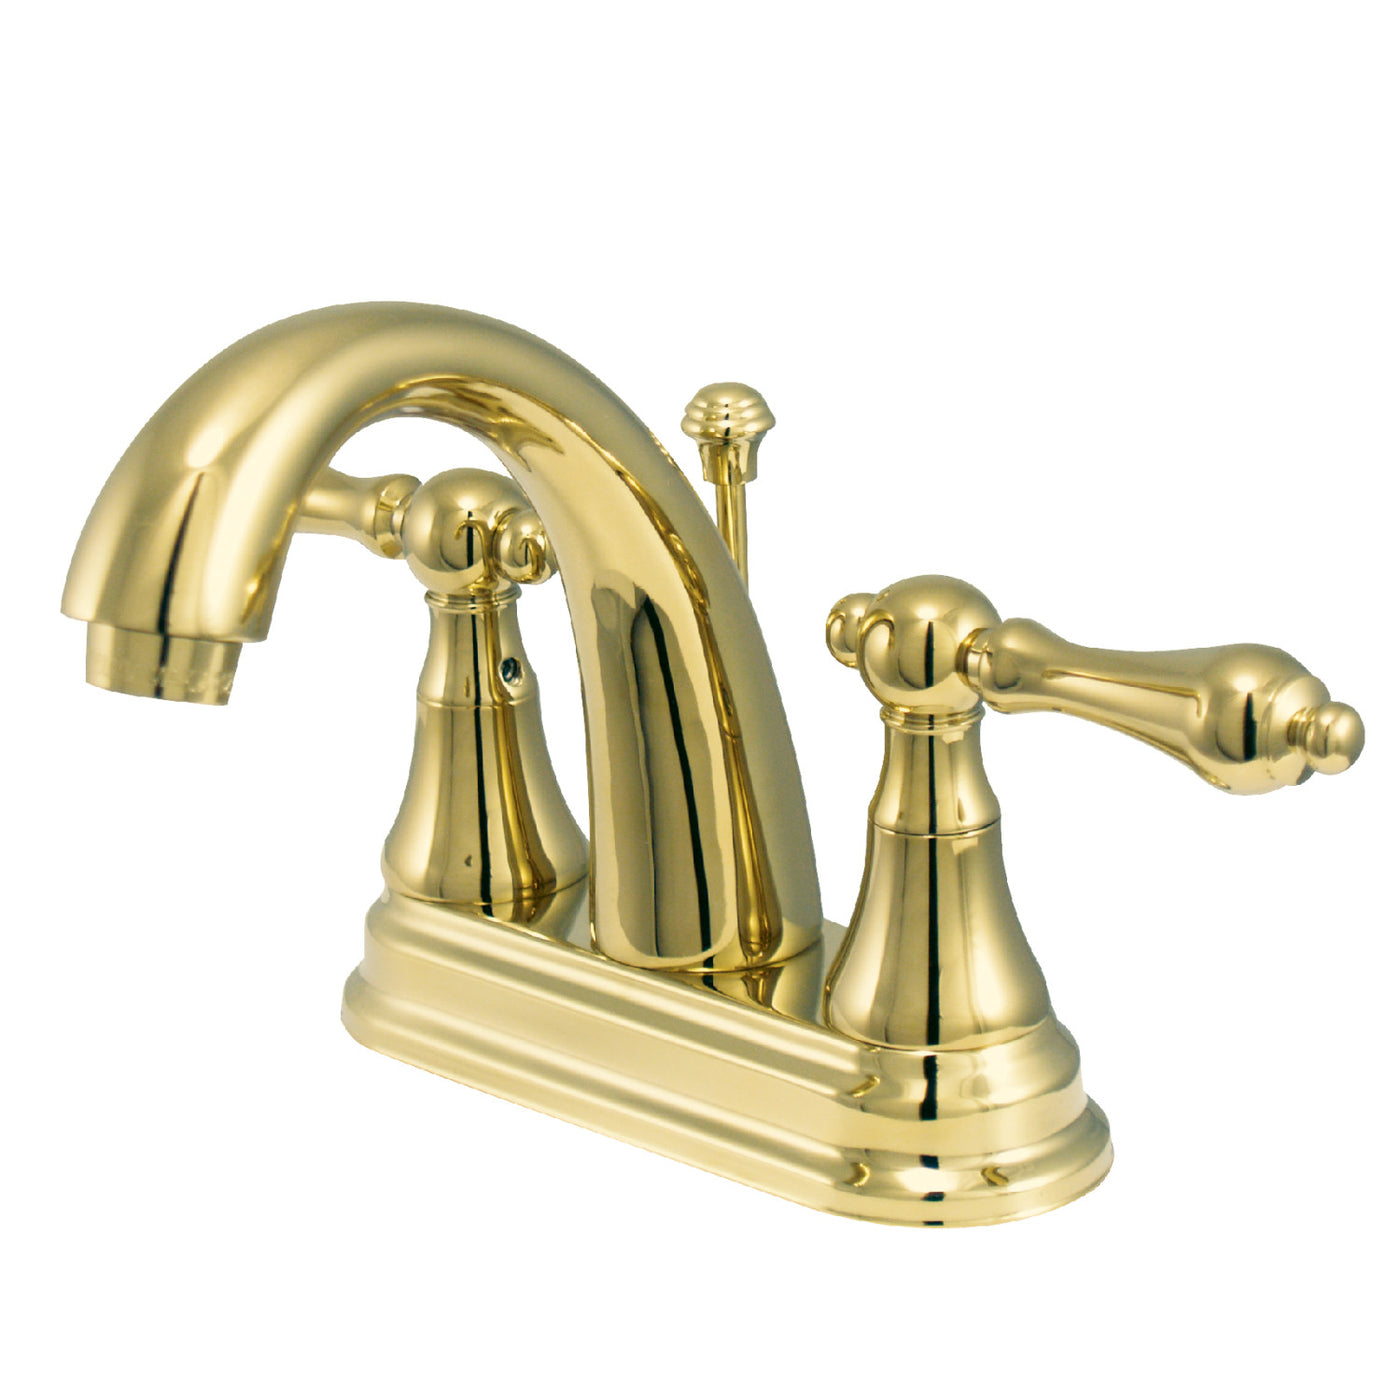 Elements of Design ES7612AL 4-Inch Centerset Bathroom Faucet with Brass Pop-Up, Polished Brass